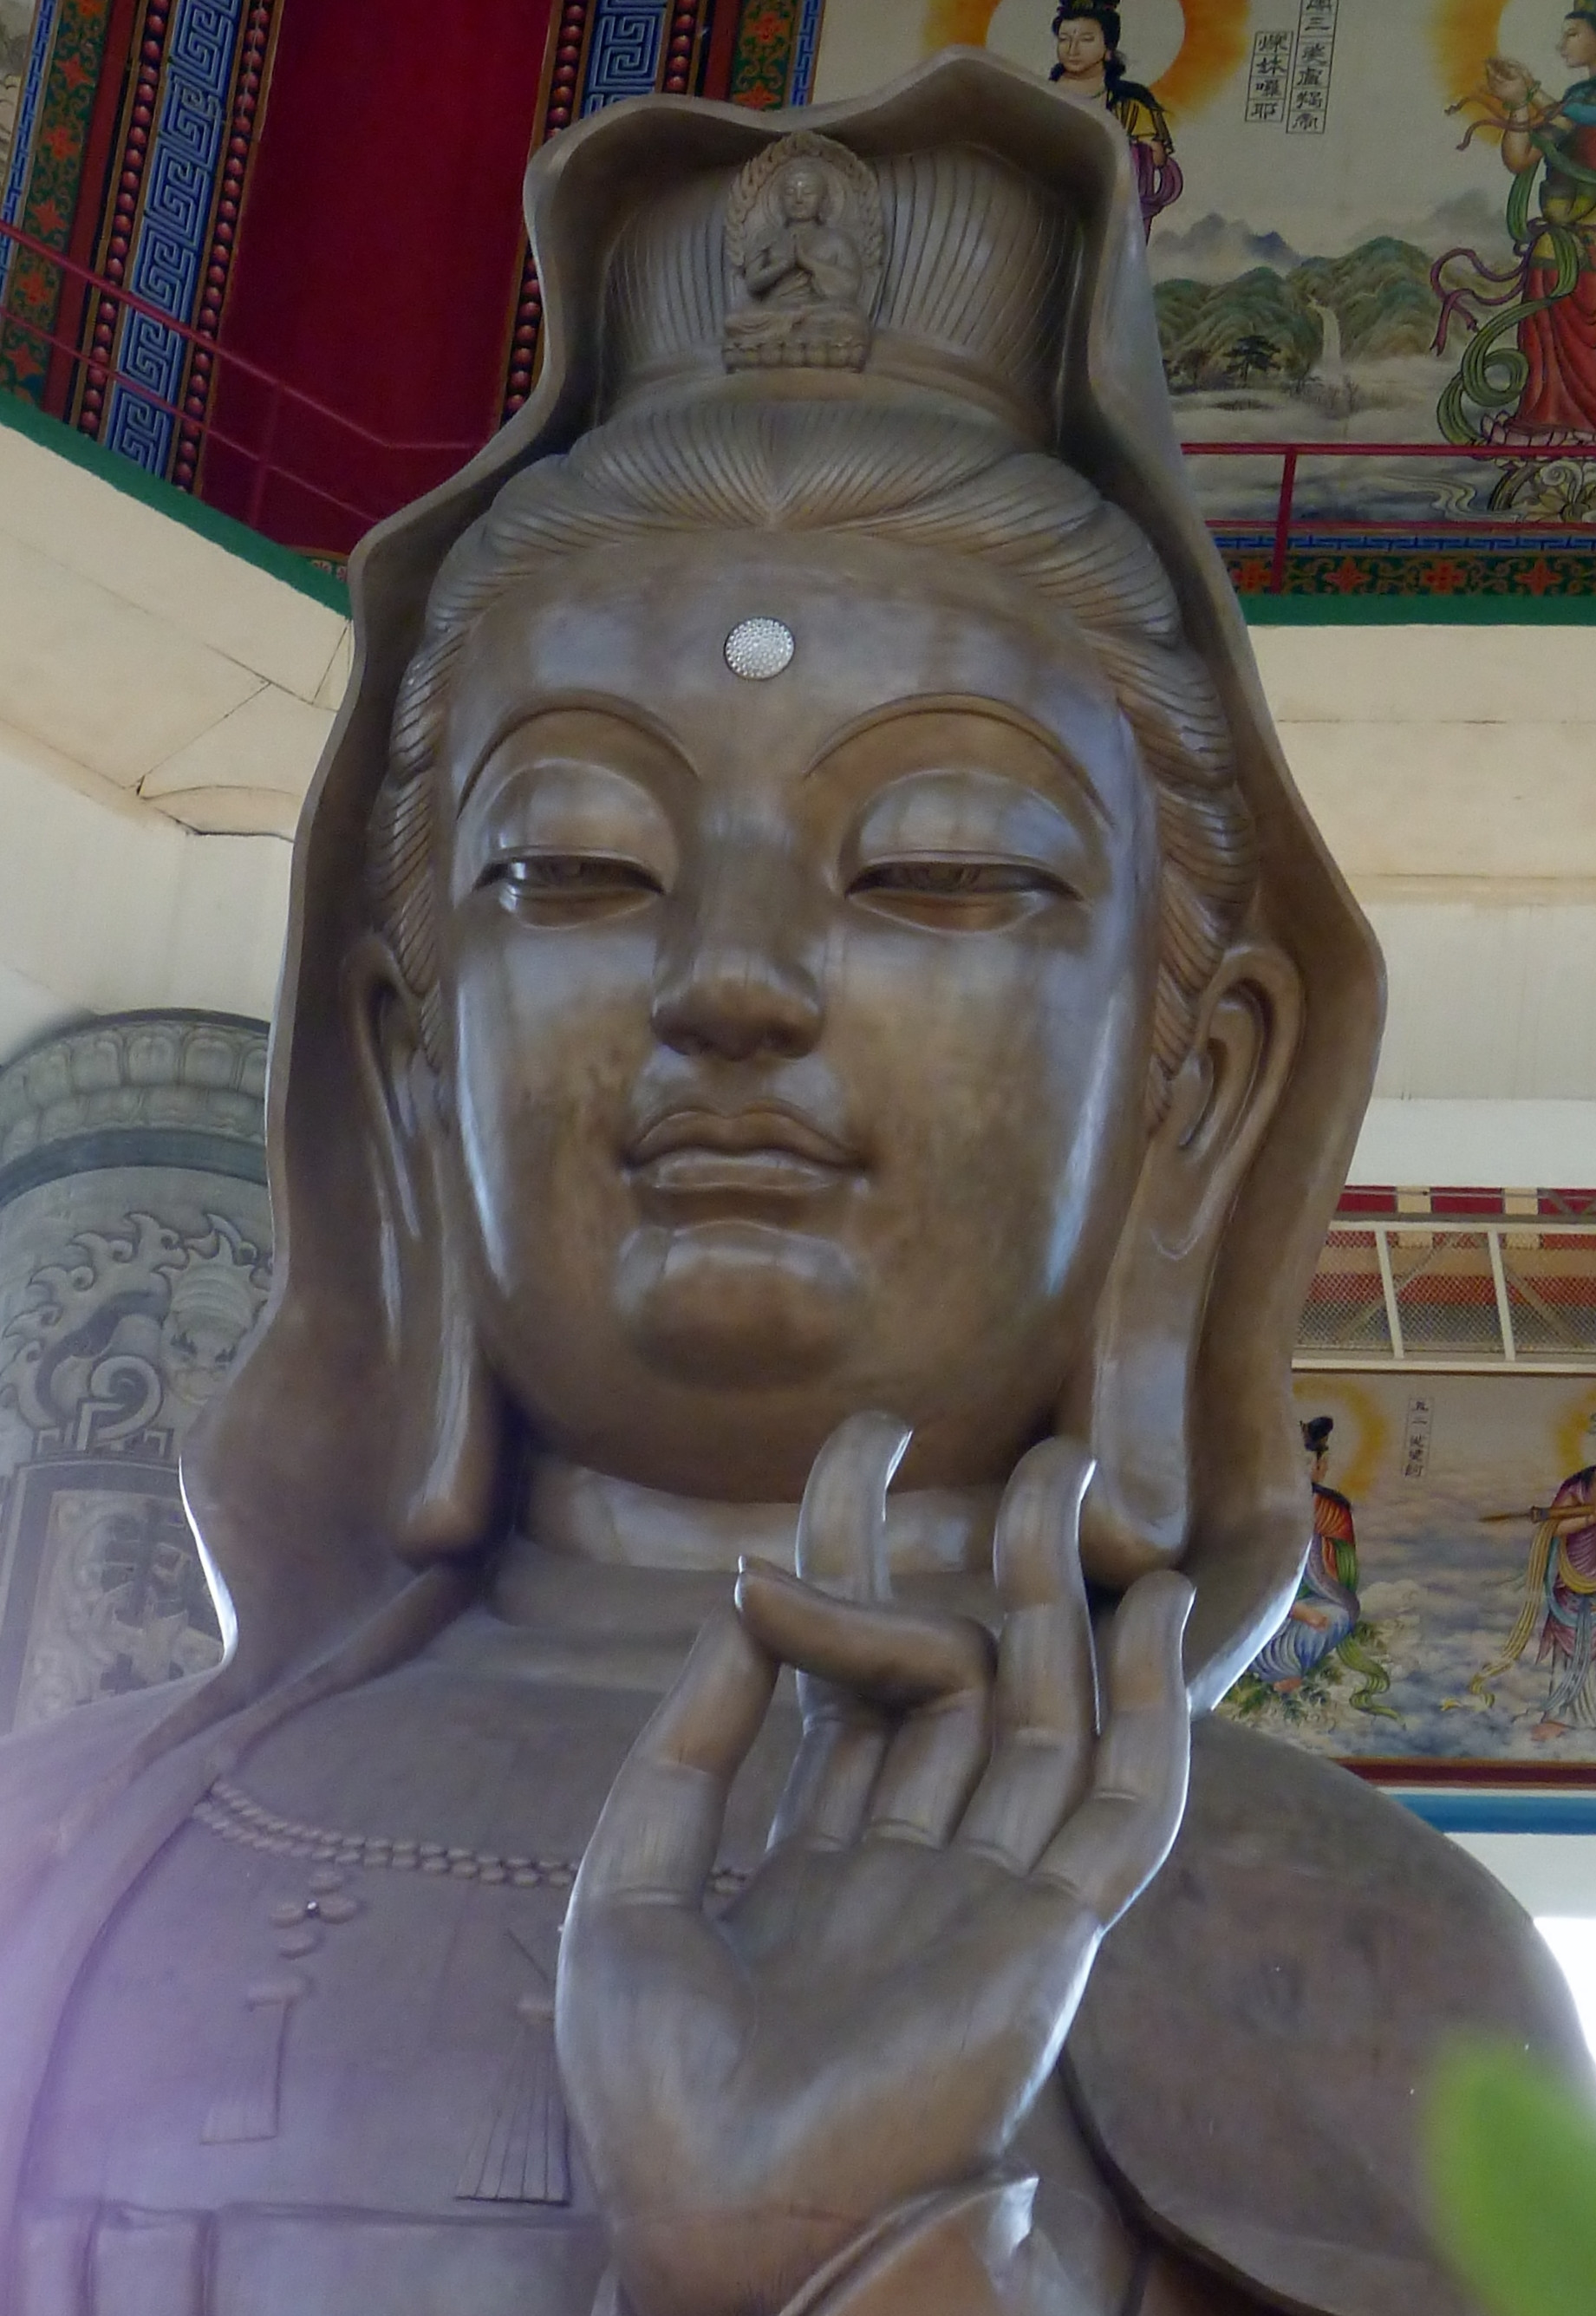 The statue of the Kuan Yin close up